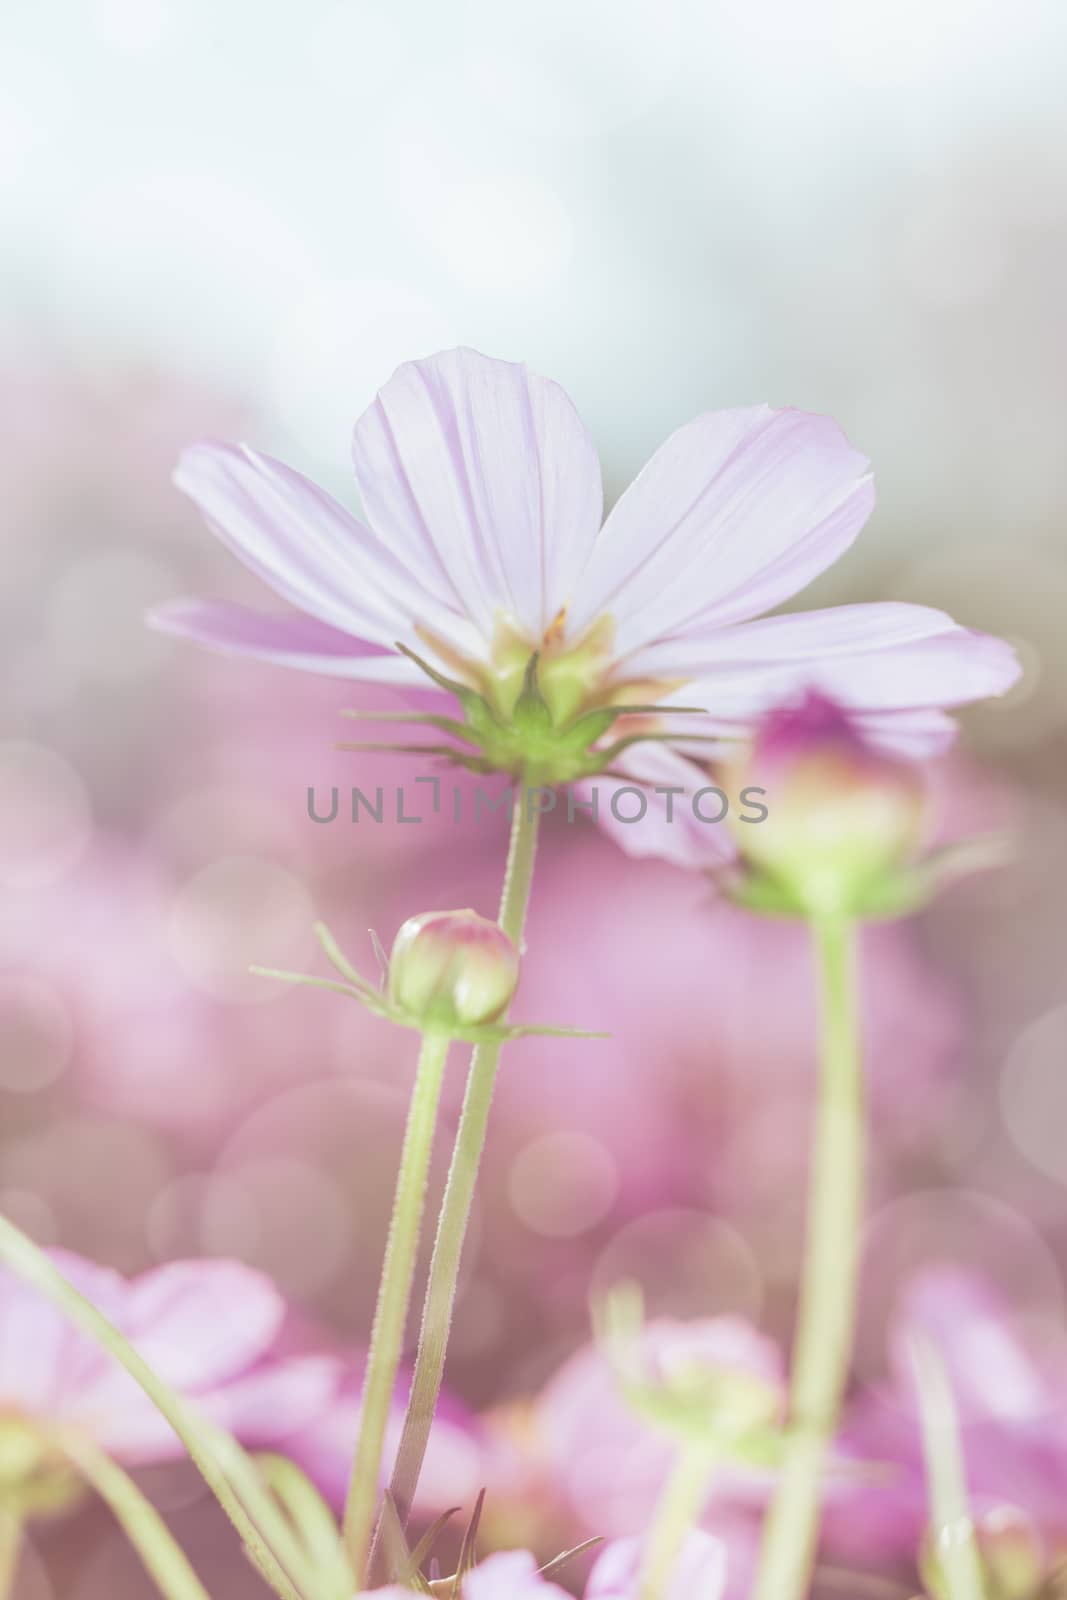 High key image of pink beauty cosmos flowers under the sunshine. Vertical image, blurred nature background. Beautiful floral use as background. Shallow depth of field.